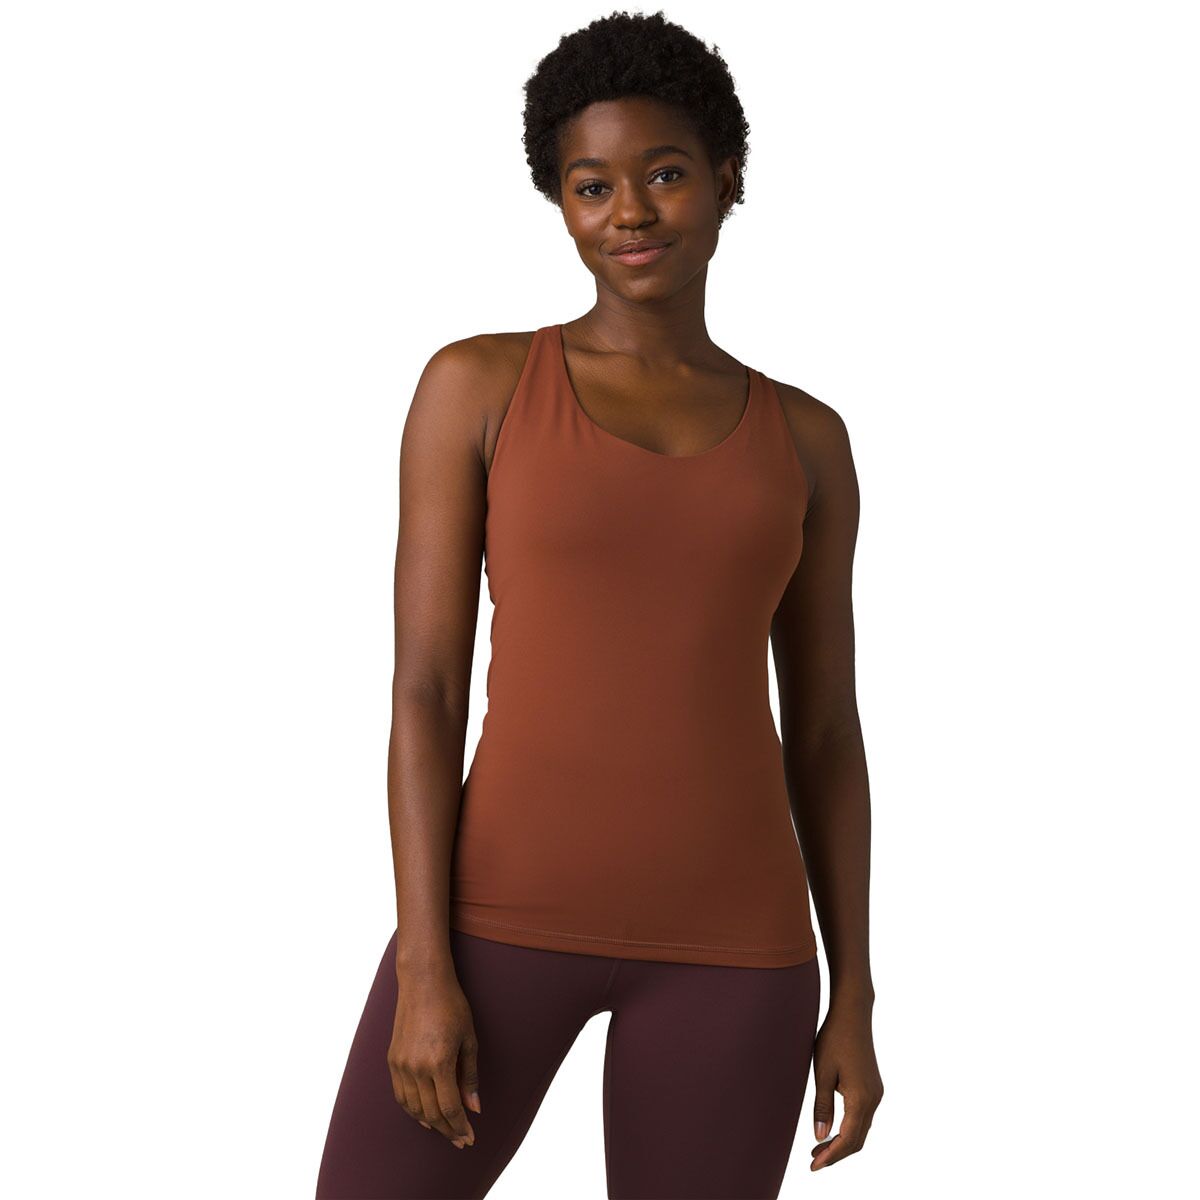 Everyday Support Tank Top - Women